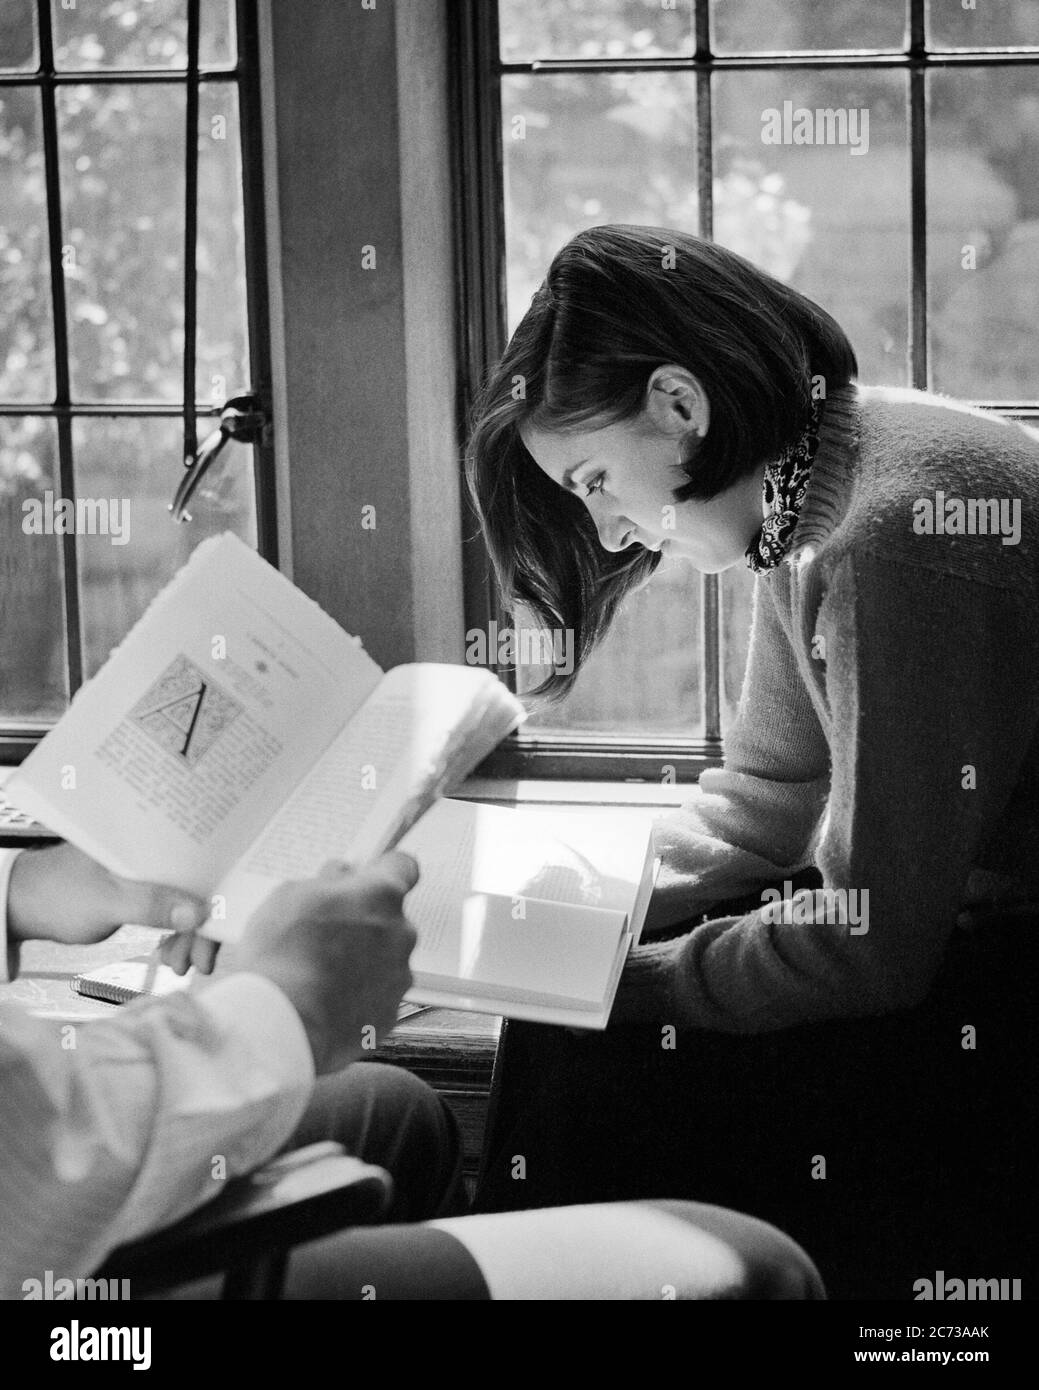 1960s 1970s FEMALE COLLEGE STUDENT BY WINDOW SUNLIGHT READING A BOOK MALE STUDENT HAND AND BOOK ONLY - s17257 HAR001 HARS INFORMATION MYSTERY LIFESTYLE FEMALES COPY SPACE HALF-LENGTH LADIES PERSONS INSPIRATION SUNLIGHT SERENITY SPIRITUALITY CONFIDENCE B&W BRUNETTE GOALS HIGH ANGLE DISCOVERY UNIVERSITIES KNOWLEDGE OPPORTUNITY HIGHER EDUCATION STYLISH TEENAGED COLLEGES COED FOCUSED GROWTH IDEAS LITERATURE YOUNG ADULT WOMAN BLACK AND WHITE CAUCASIAN ETHNICITY CONCENTRATING CONCENTRATION HANDS ONLY HAR001 OLD FASHIONED Stock Photo